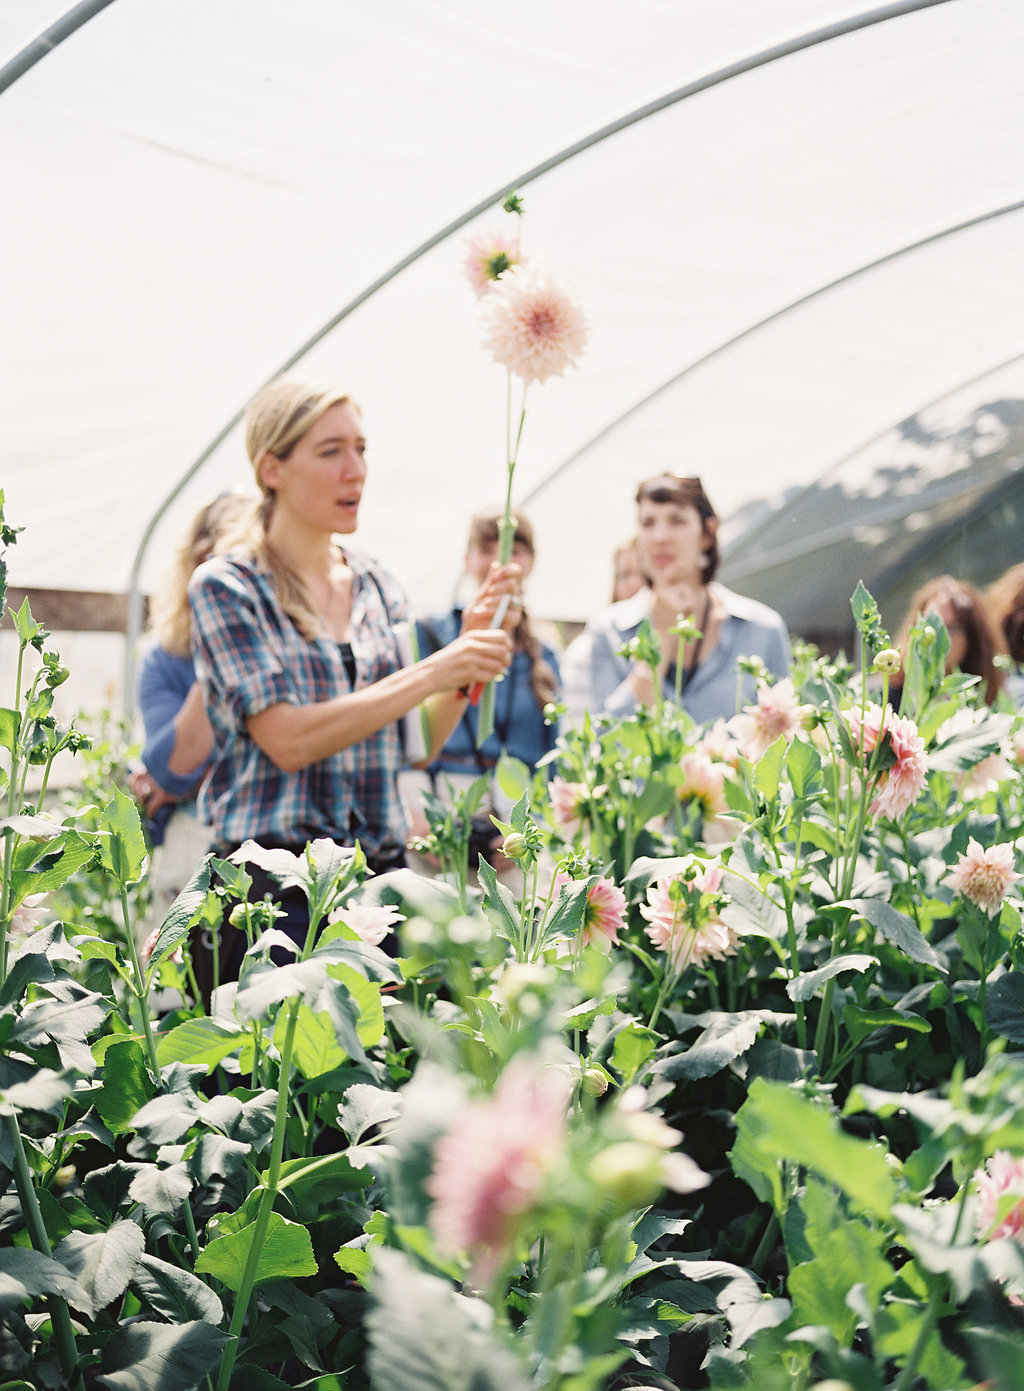 The Elevated Wildflower Meadow-Inspired Workshop and Dinner with Floret Flowers, Part One